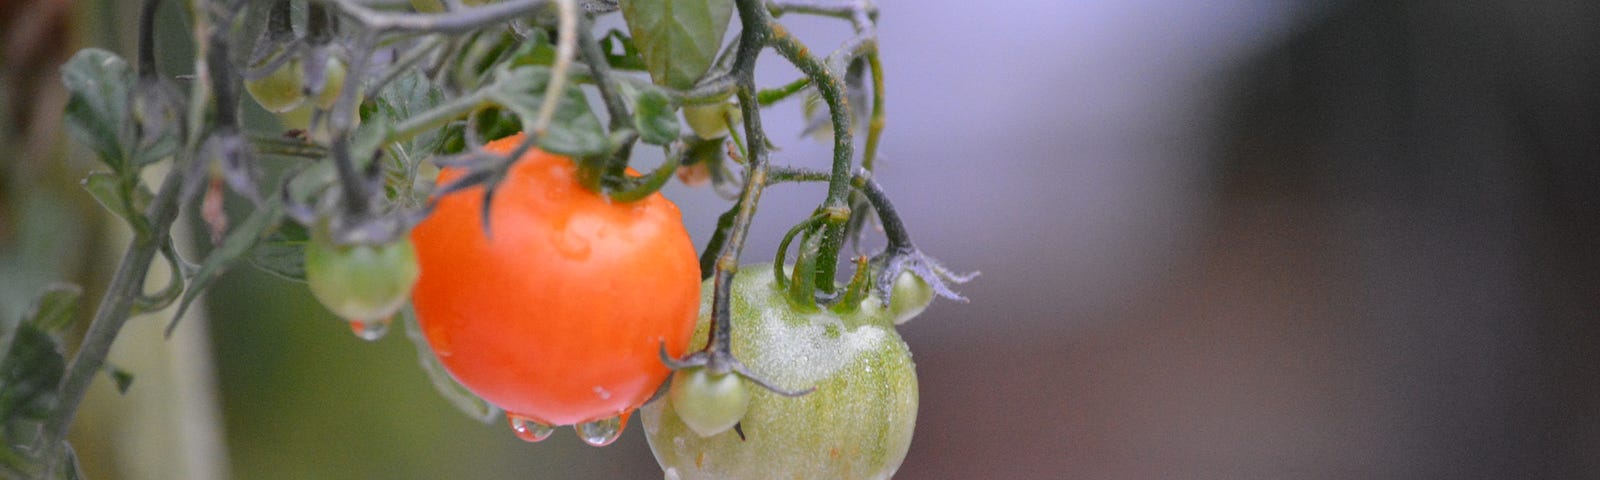 twin tomatoes, after rain; one red and one green